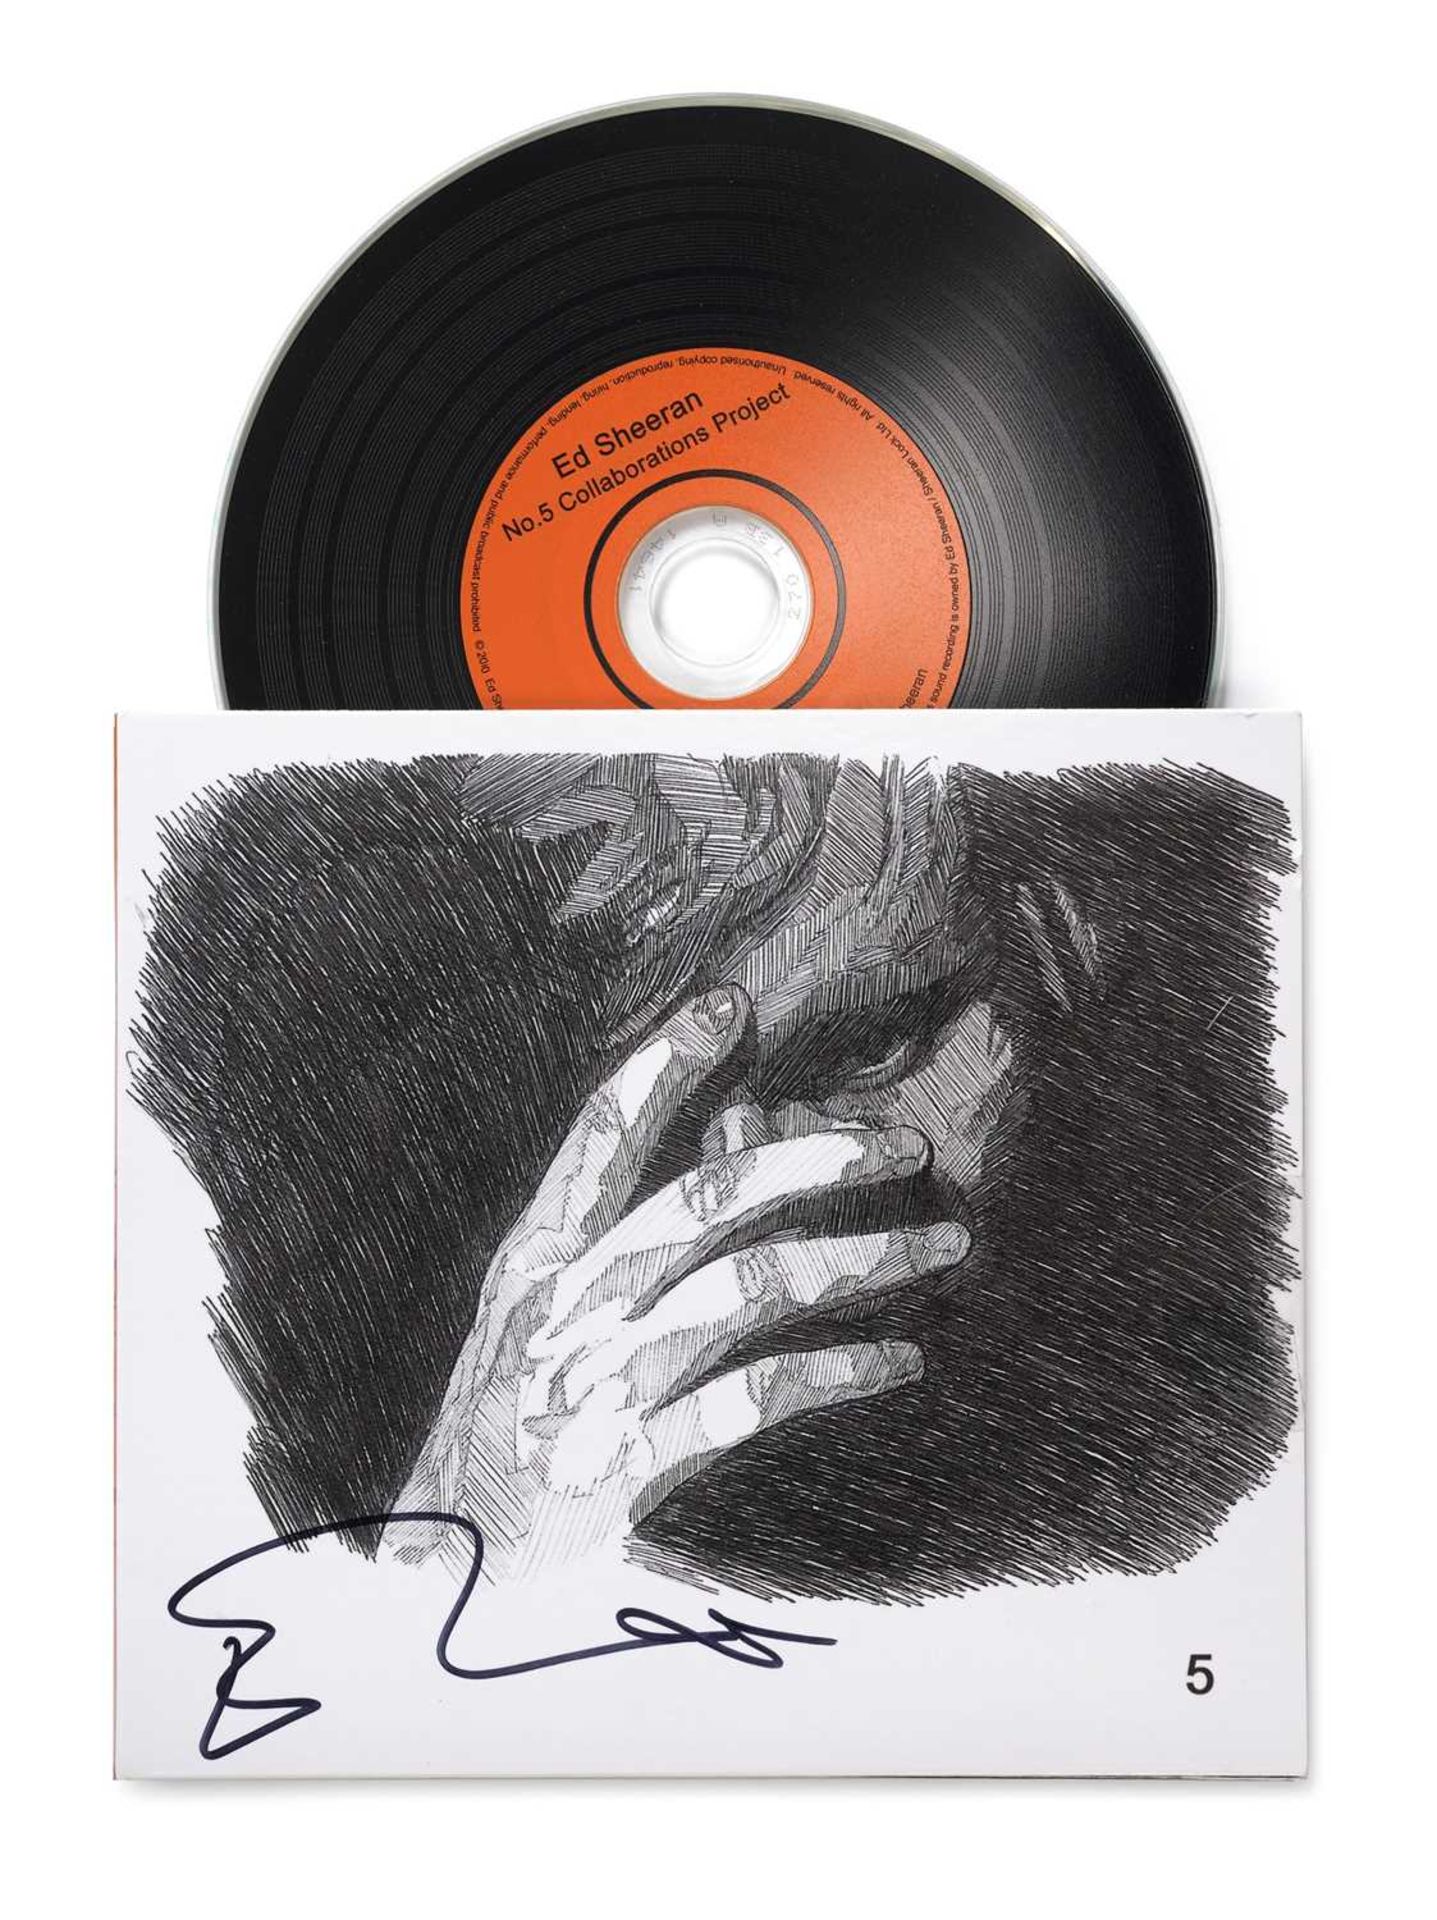 Signed Ed Sheeran No.5 Collaborations CD 2011 An EP released independently by Ed Sheeran in